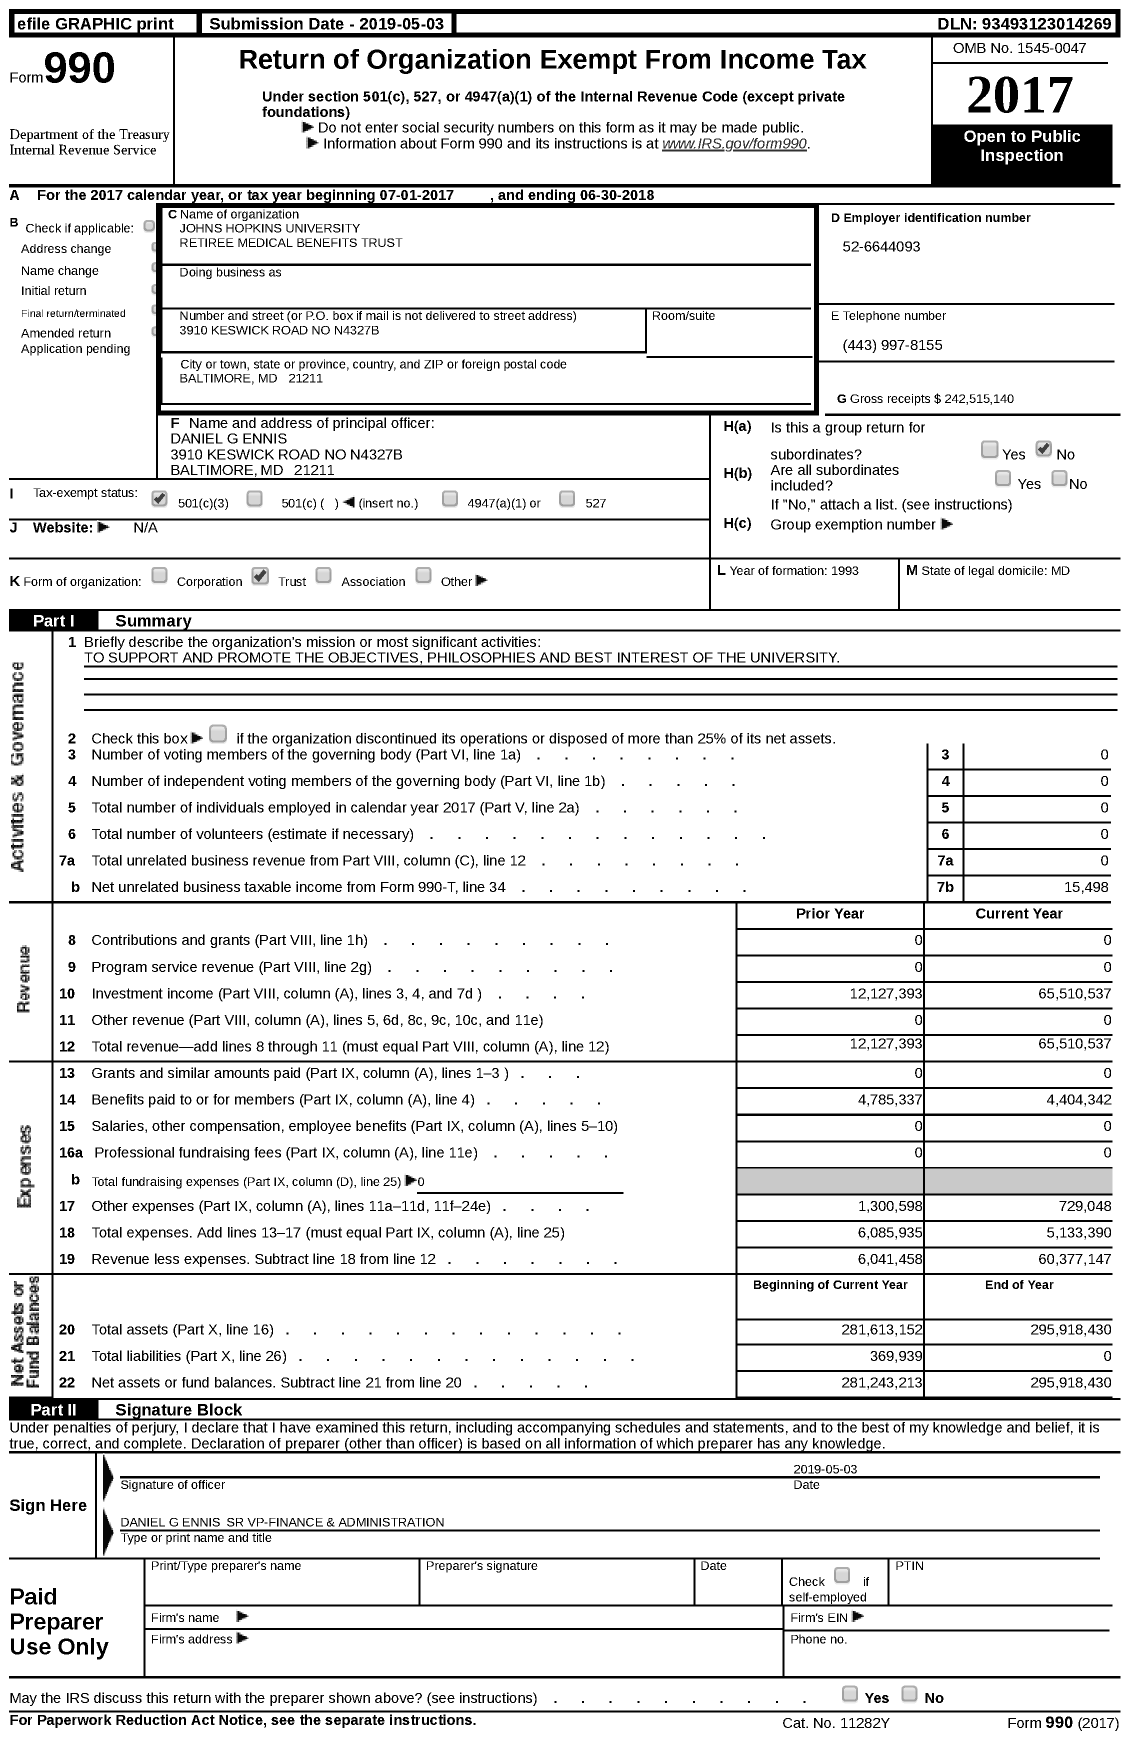 Image of first page of 2017 Form 990 for Johns Hopkins University Retiree Medical Benefits Trust